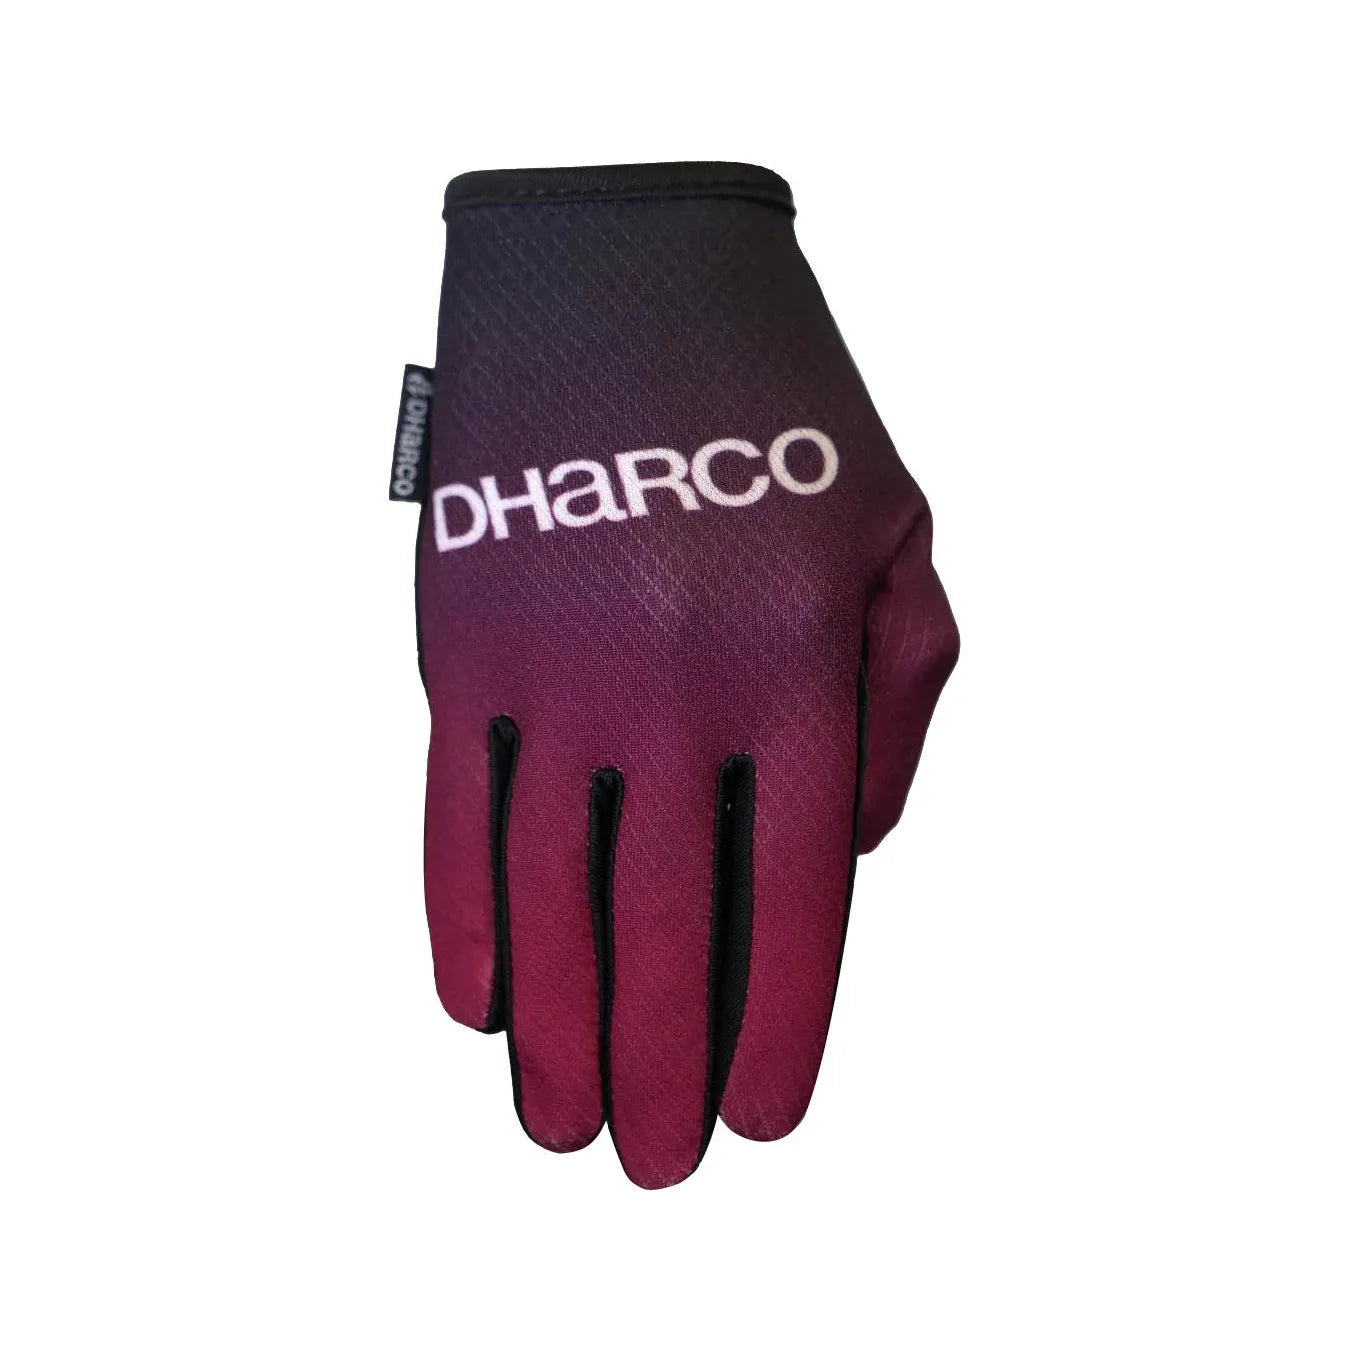 DHaRCO Youth Race Gloves - Youth M - Cherry Dip